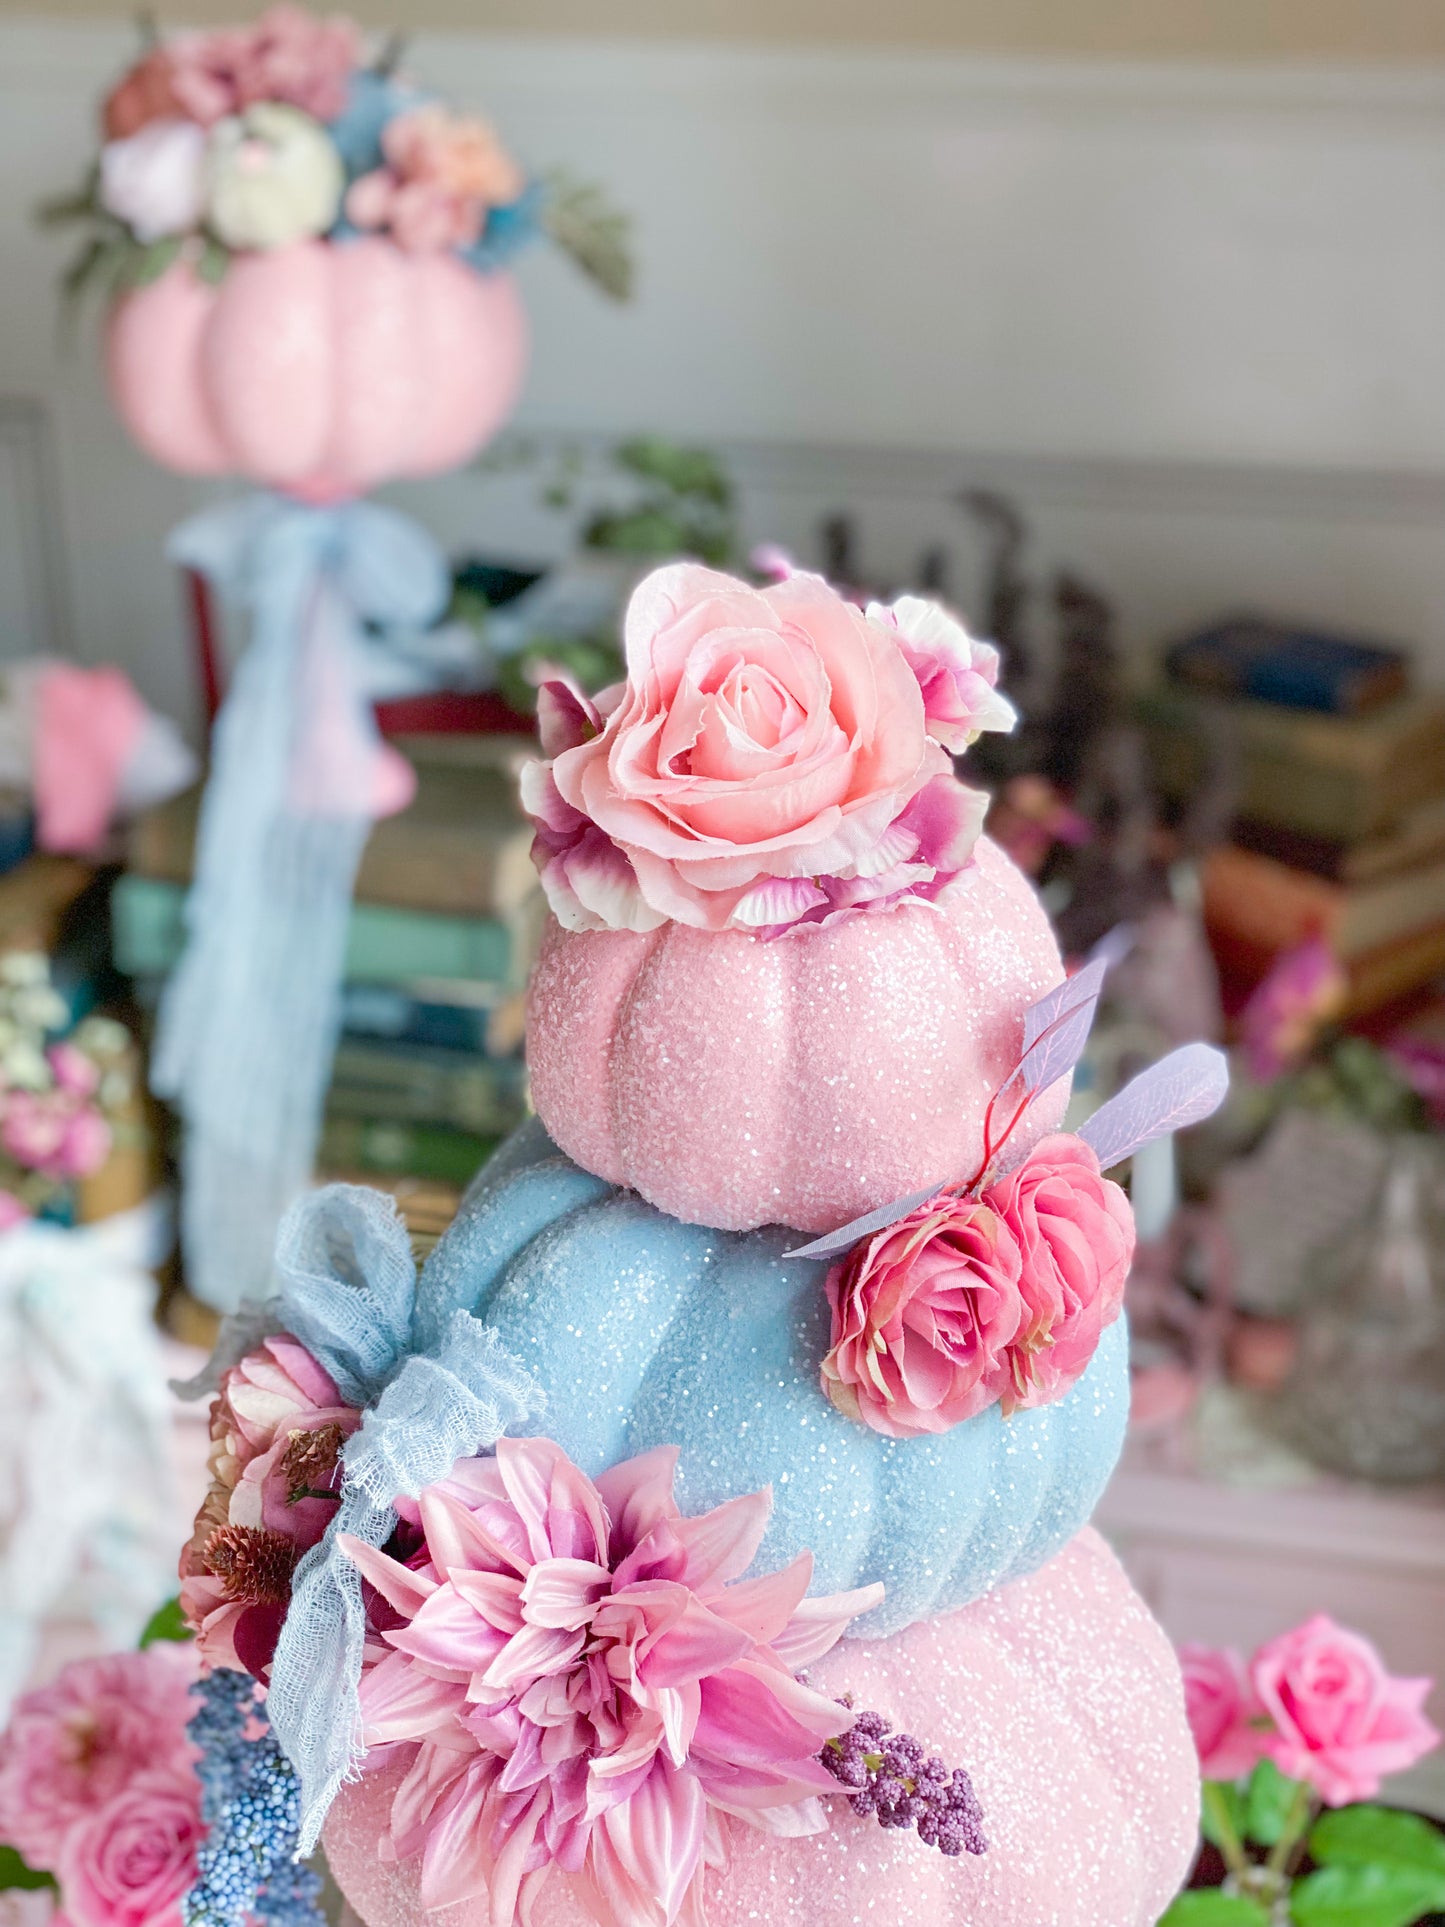 Bespoke Upcycled Pink and Blue Glam 3 Pumpkin Topiary